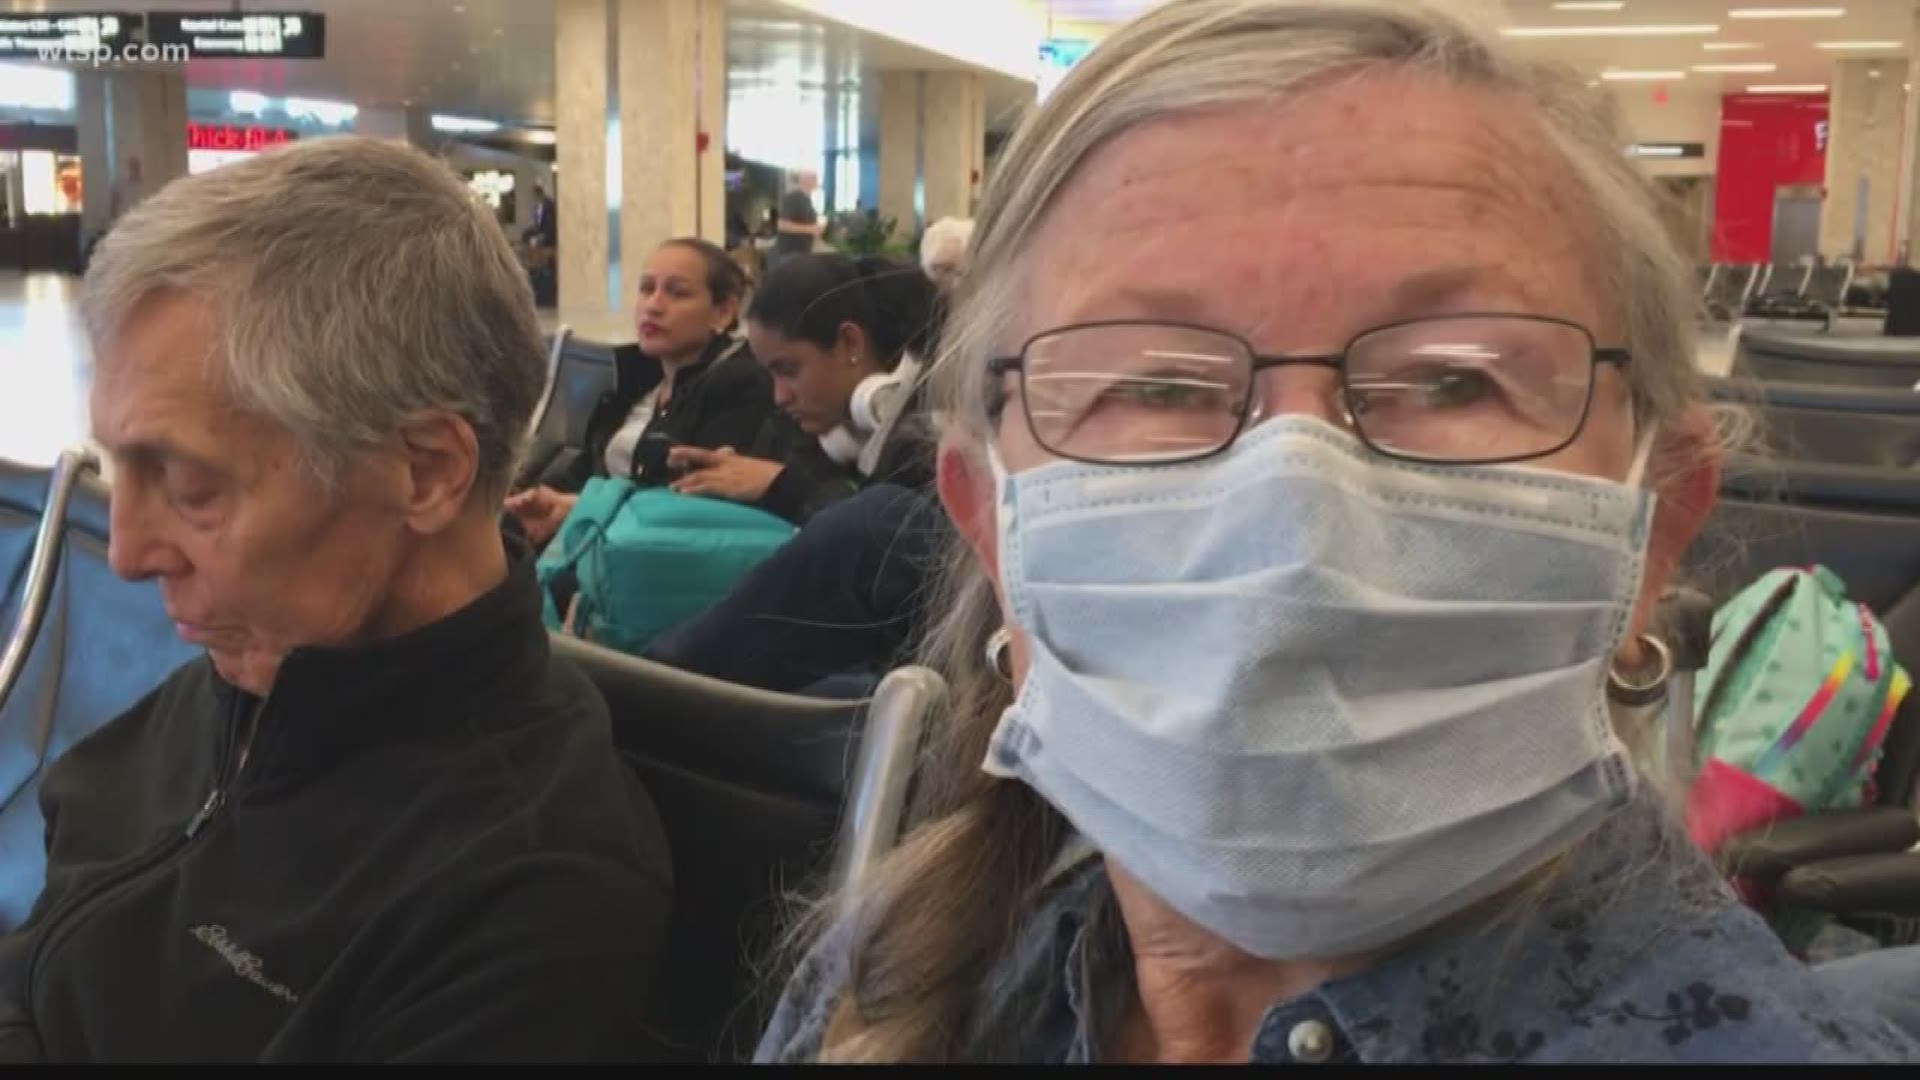 There are no confirmed cases of the virus in the Tampa Bay area, but with so many visitors here from all over the world, it’s got travelers, among others - nervous.